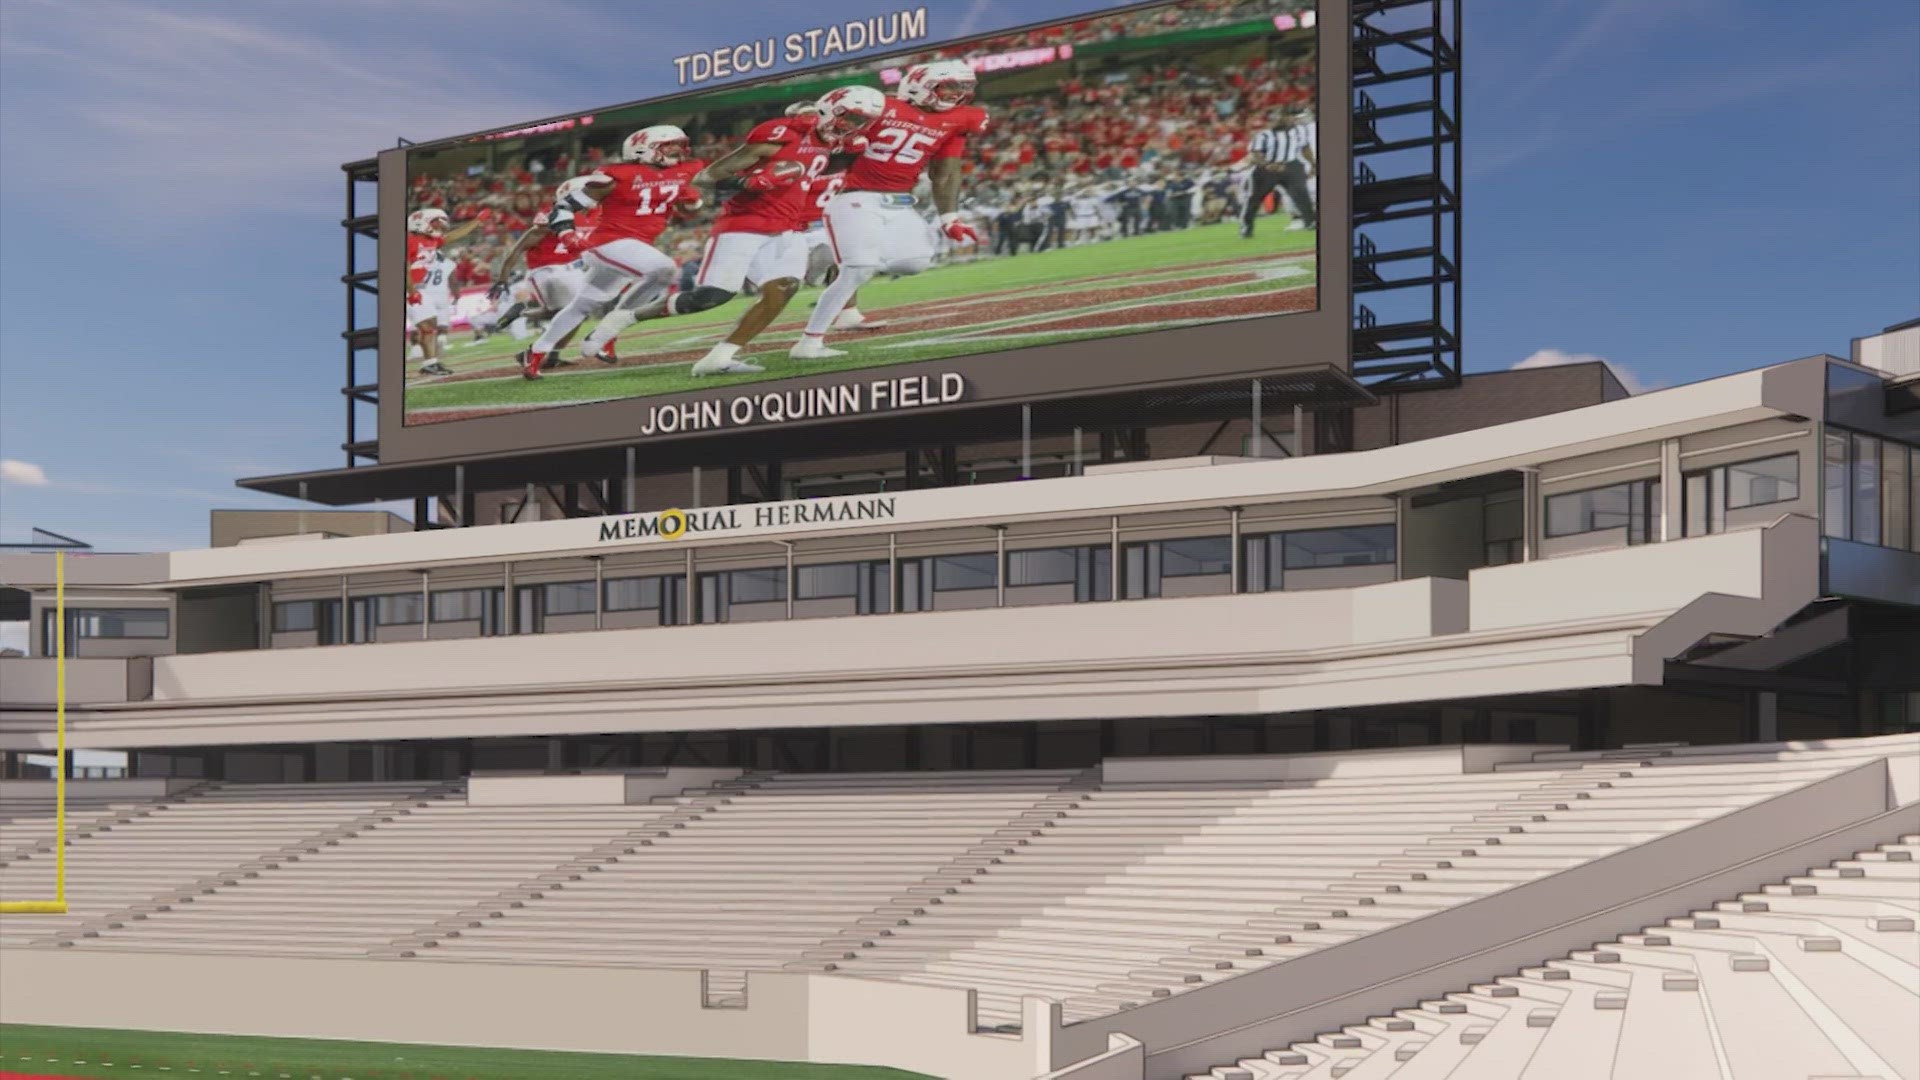 A $130 million football operation center is coming to University of Houston in the next two years thanks to the support of Memorial Hermann Health System.